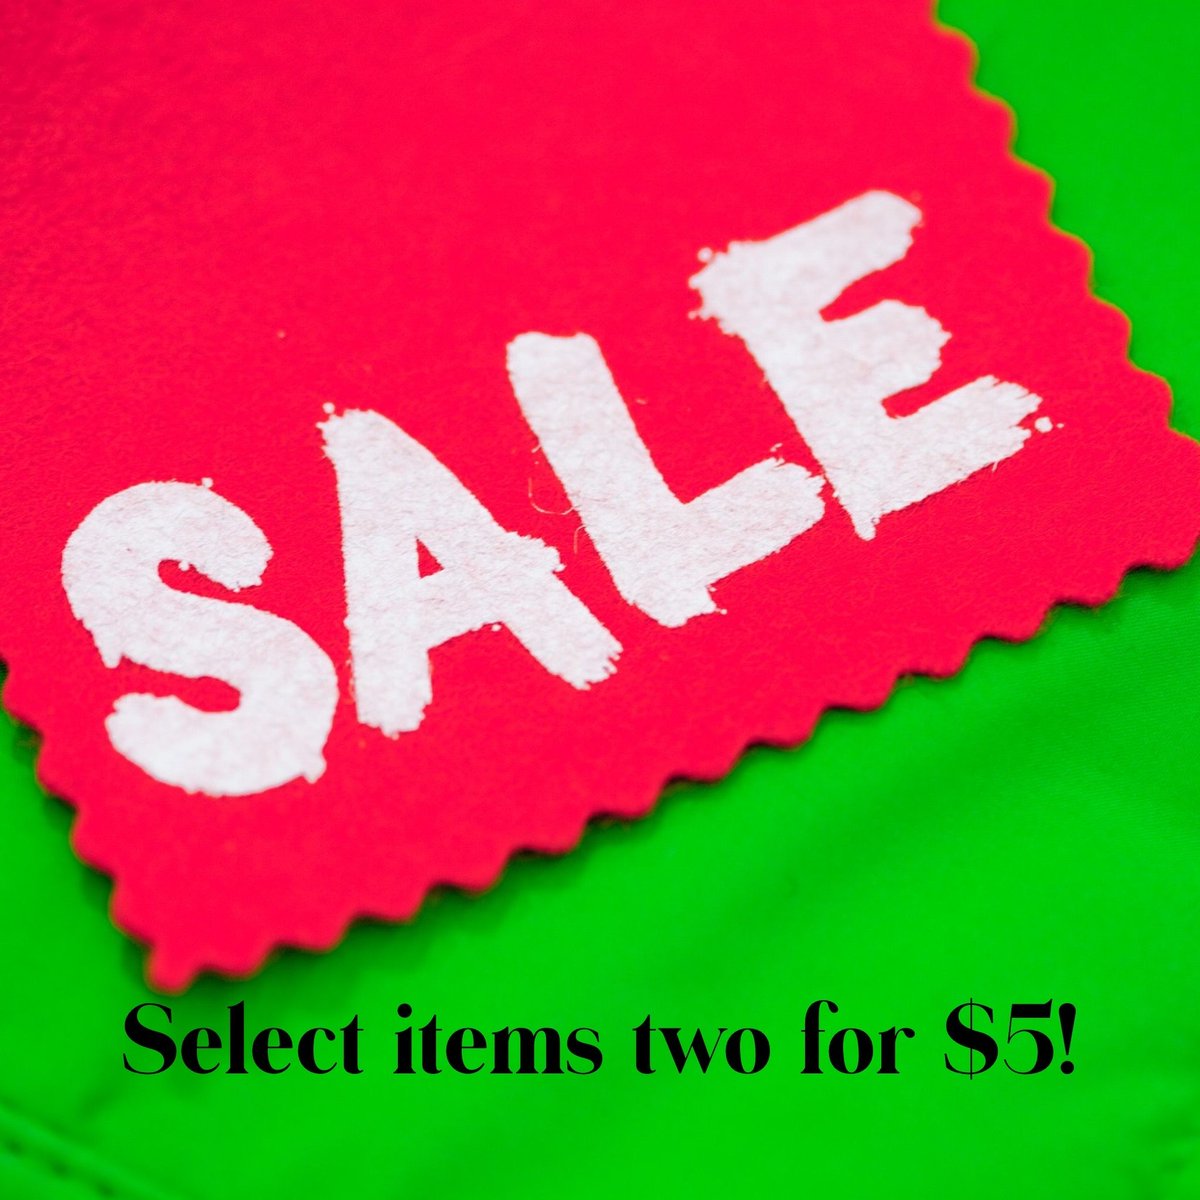 Wonder what deals you’ll find at our Second Saturday Sale this Saturday from 9am to noon. #BargainHunt #bargain #bargains #thrift #thrifting #thriftstore #resale #resalefashions #resaleBoutique #resaleshop #upscaleresale #resaleretail #sustainabkefashions